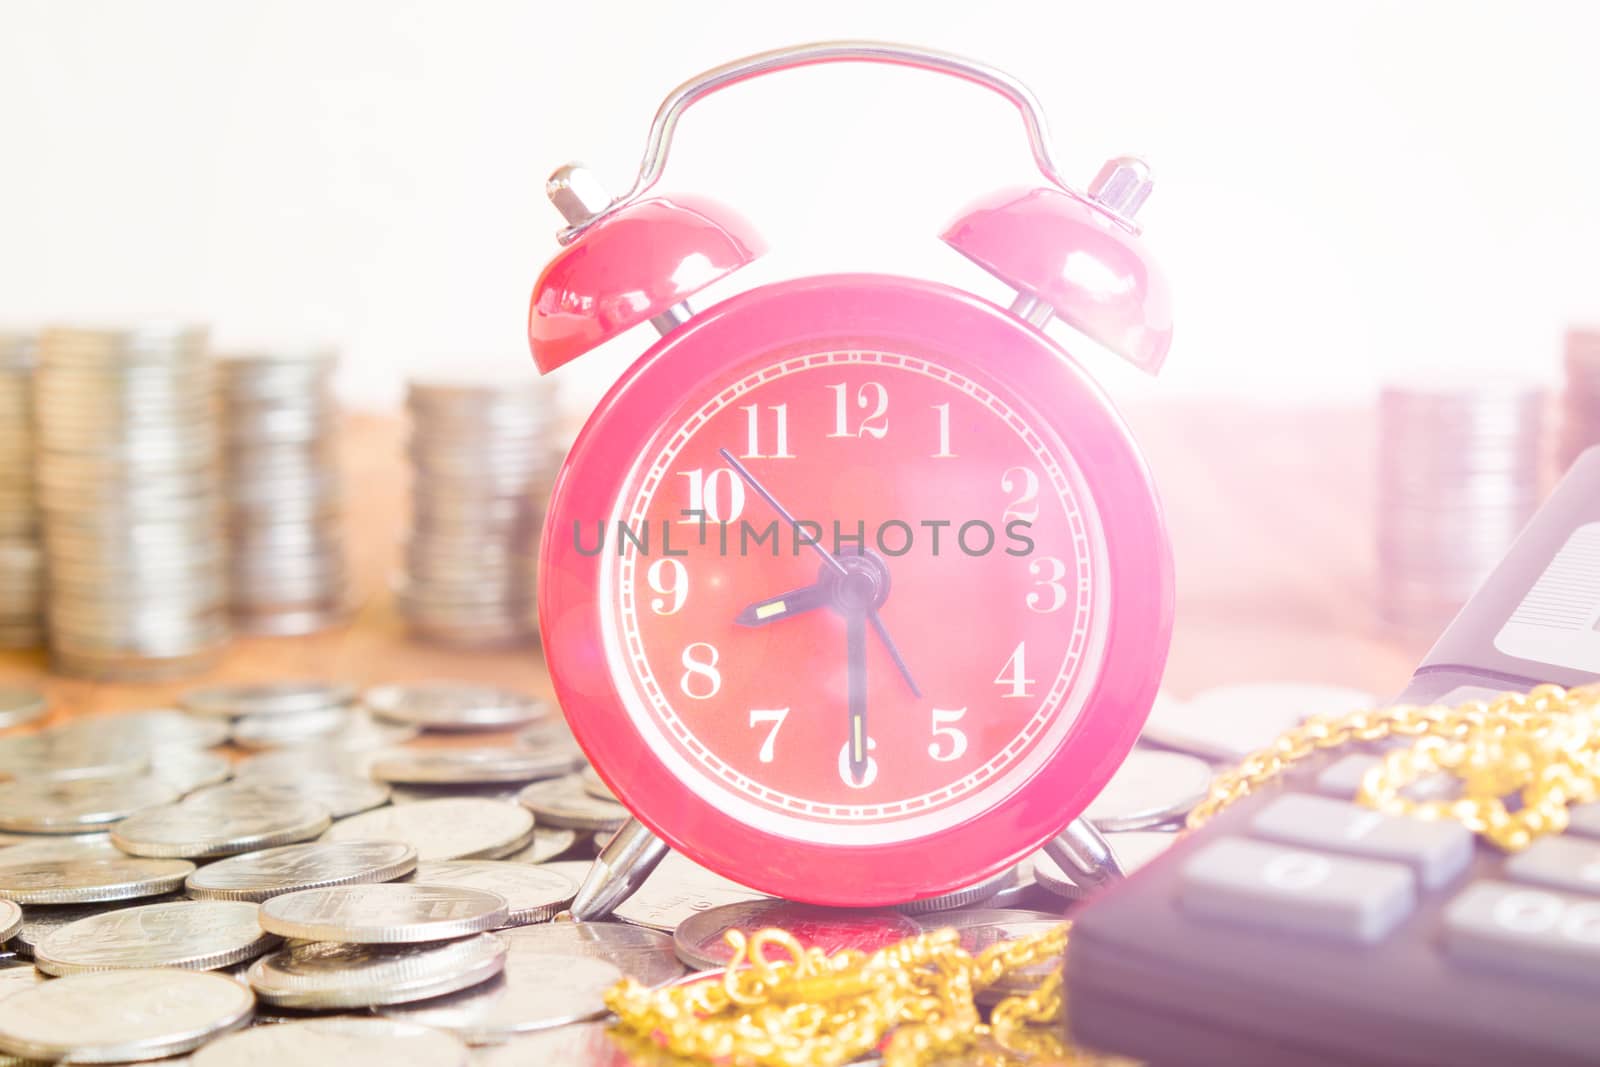 Stack Of Coins With Red Fashioned Alarm Clock For Display Planni by rakoptonLPN